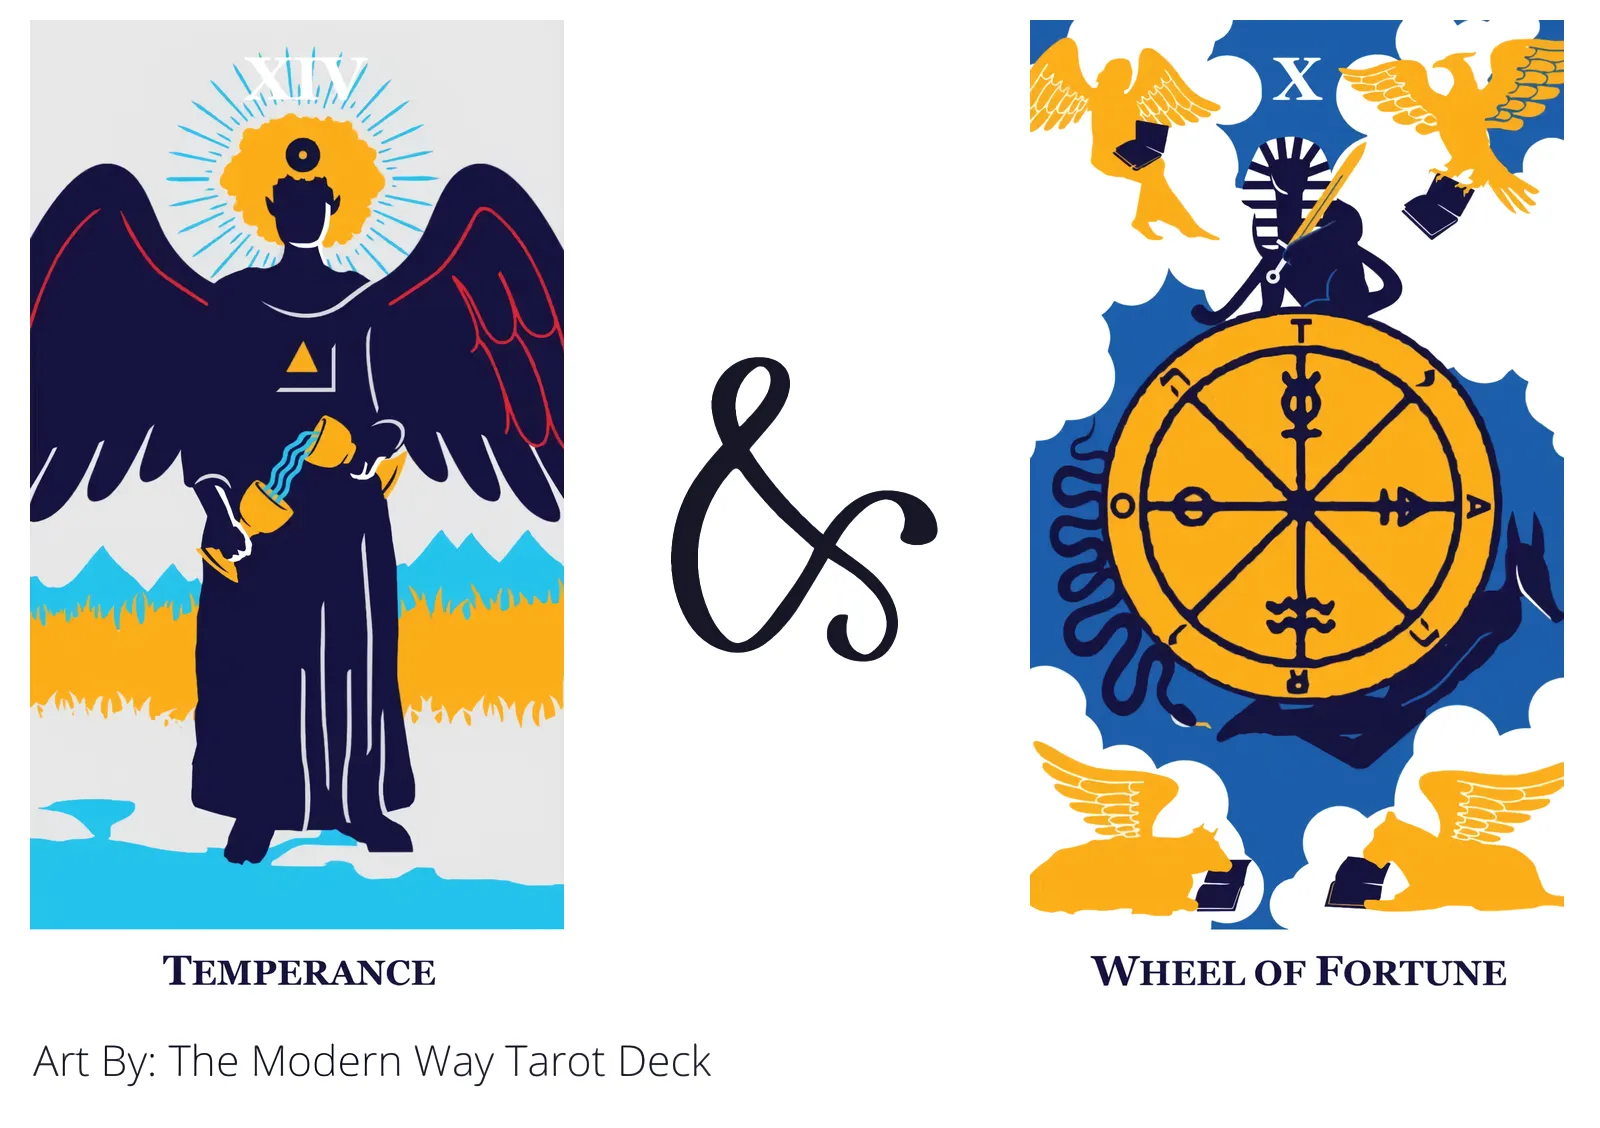 temperance and wheel of fortune tarot cards together